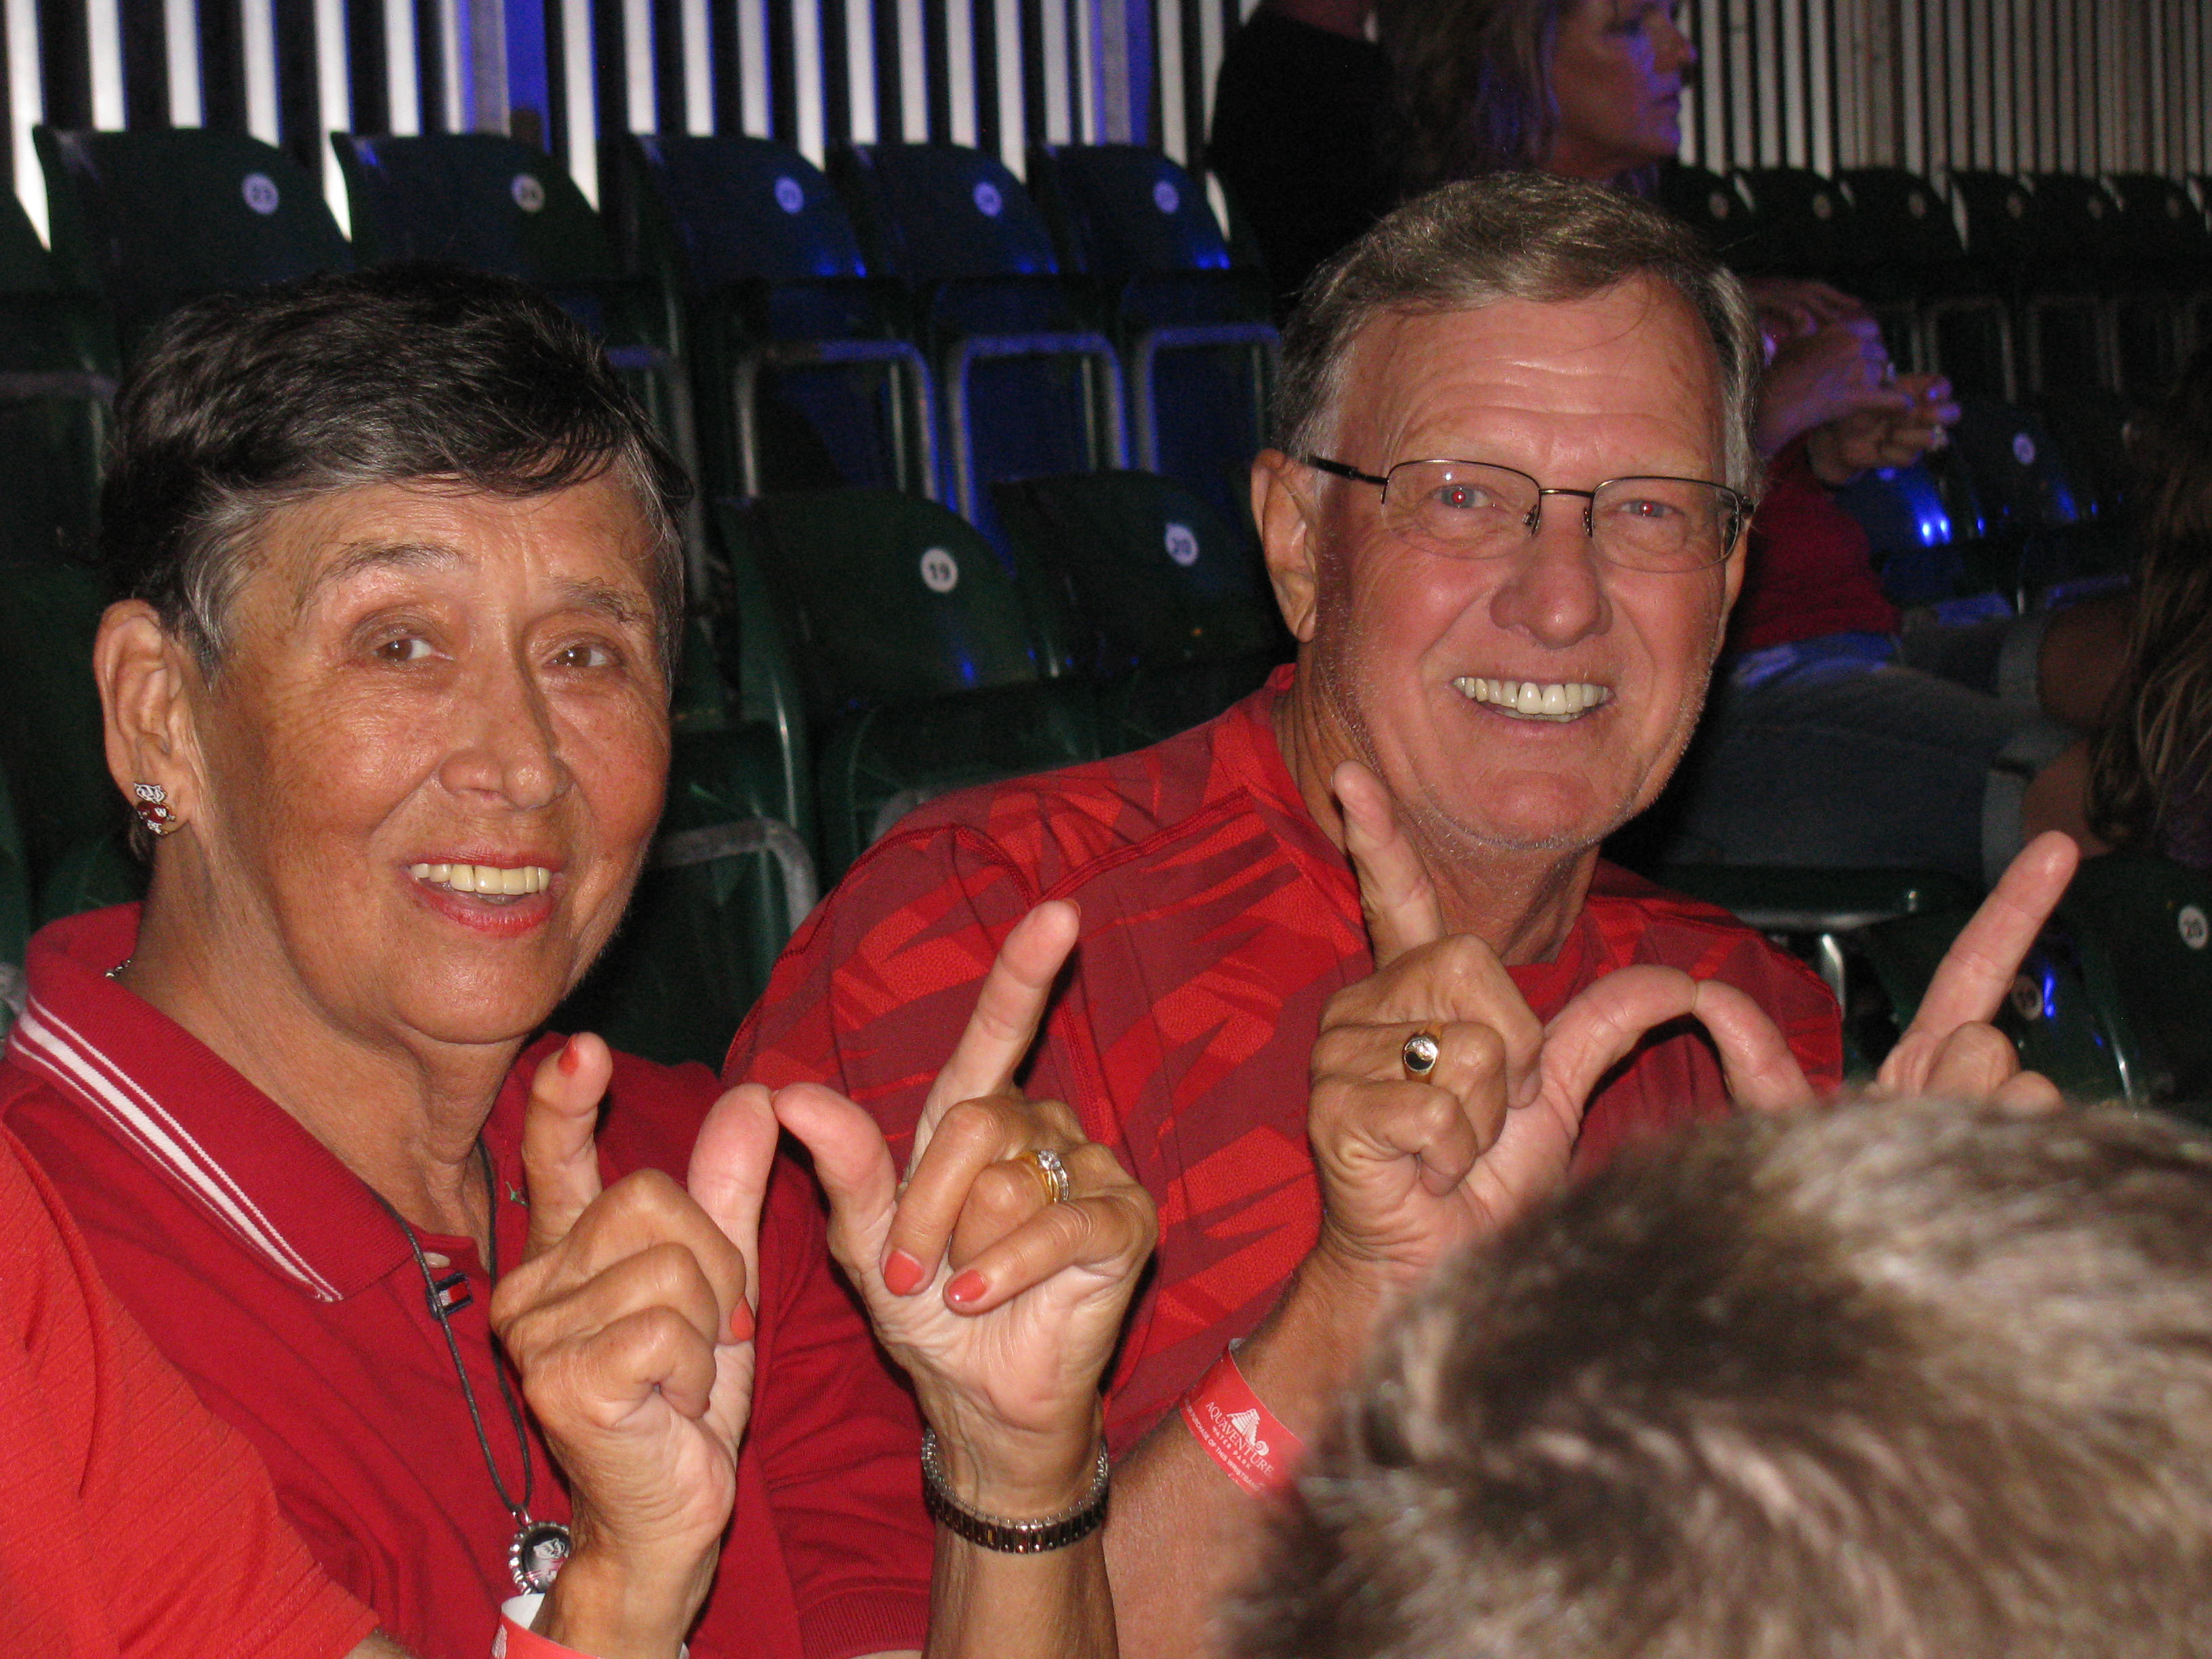 Daryl and Dawn Lund are seen smiling at the Battle 4 Atlantis basketball tournament in 2014. Photo Courtesy of Daryl Lund. 